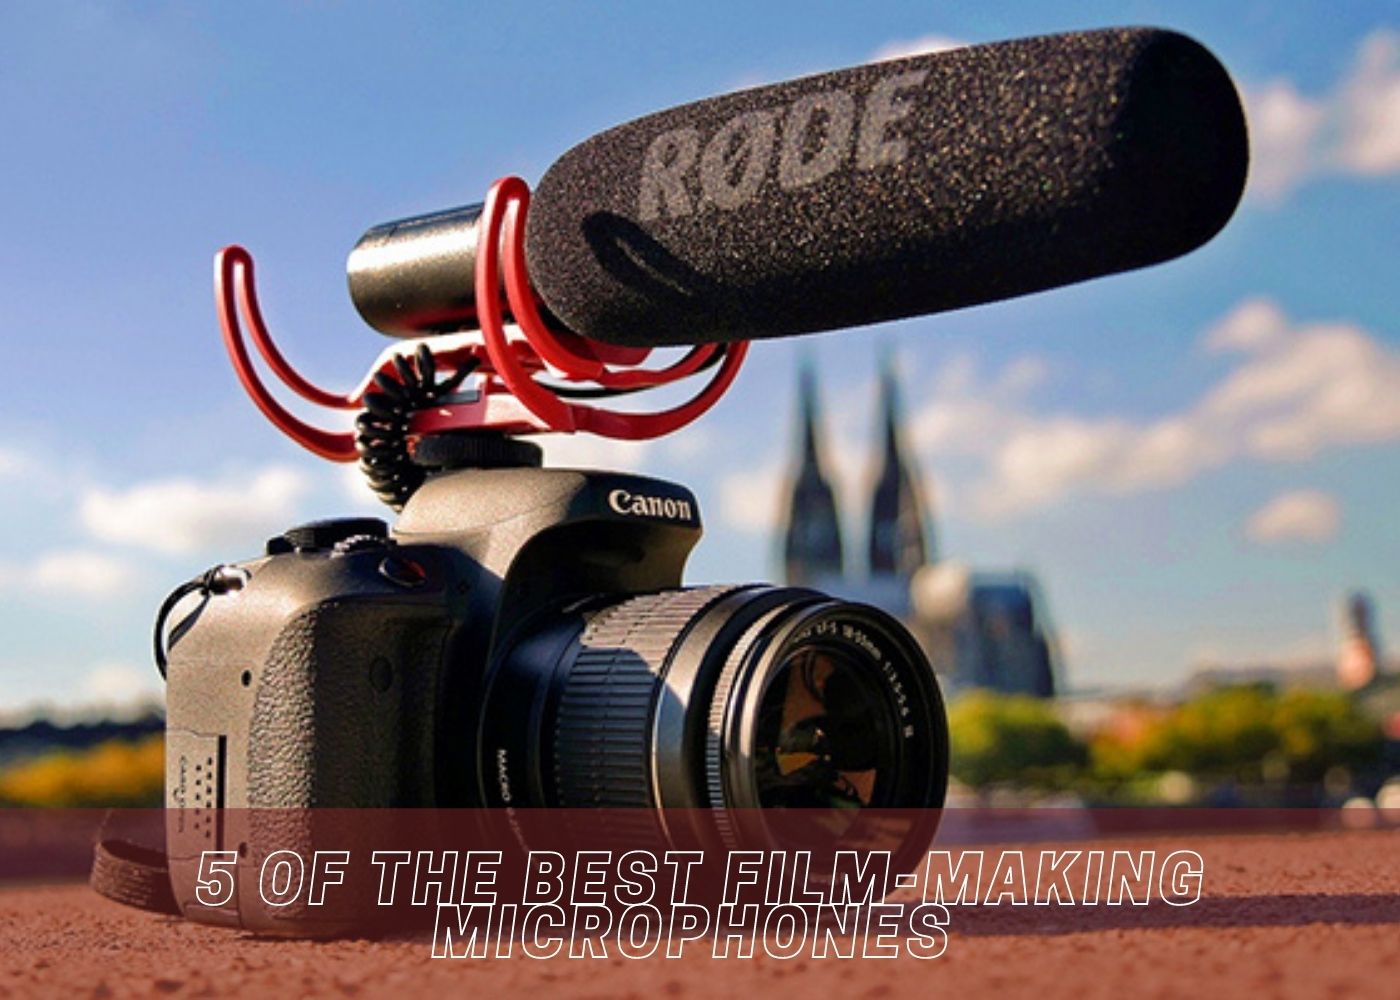 5 of the Best Film-making Microphones 